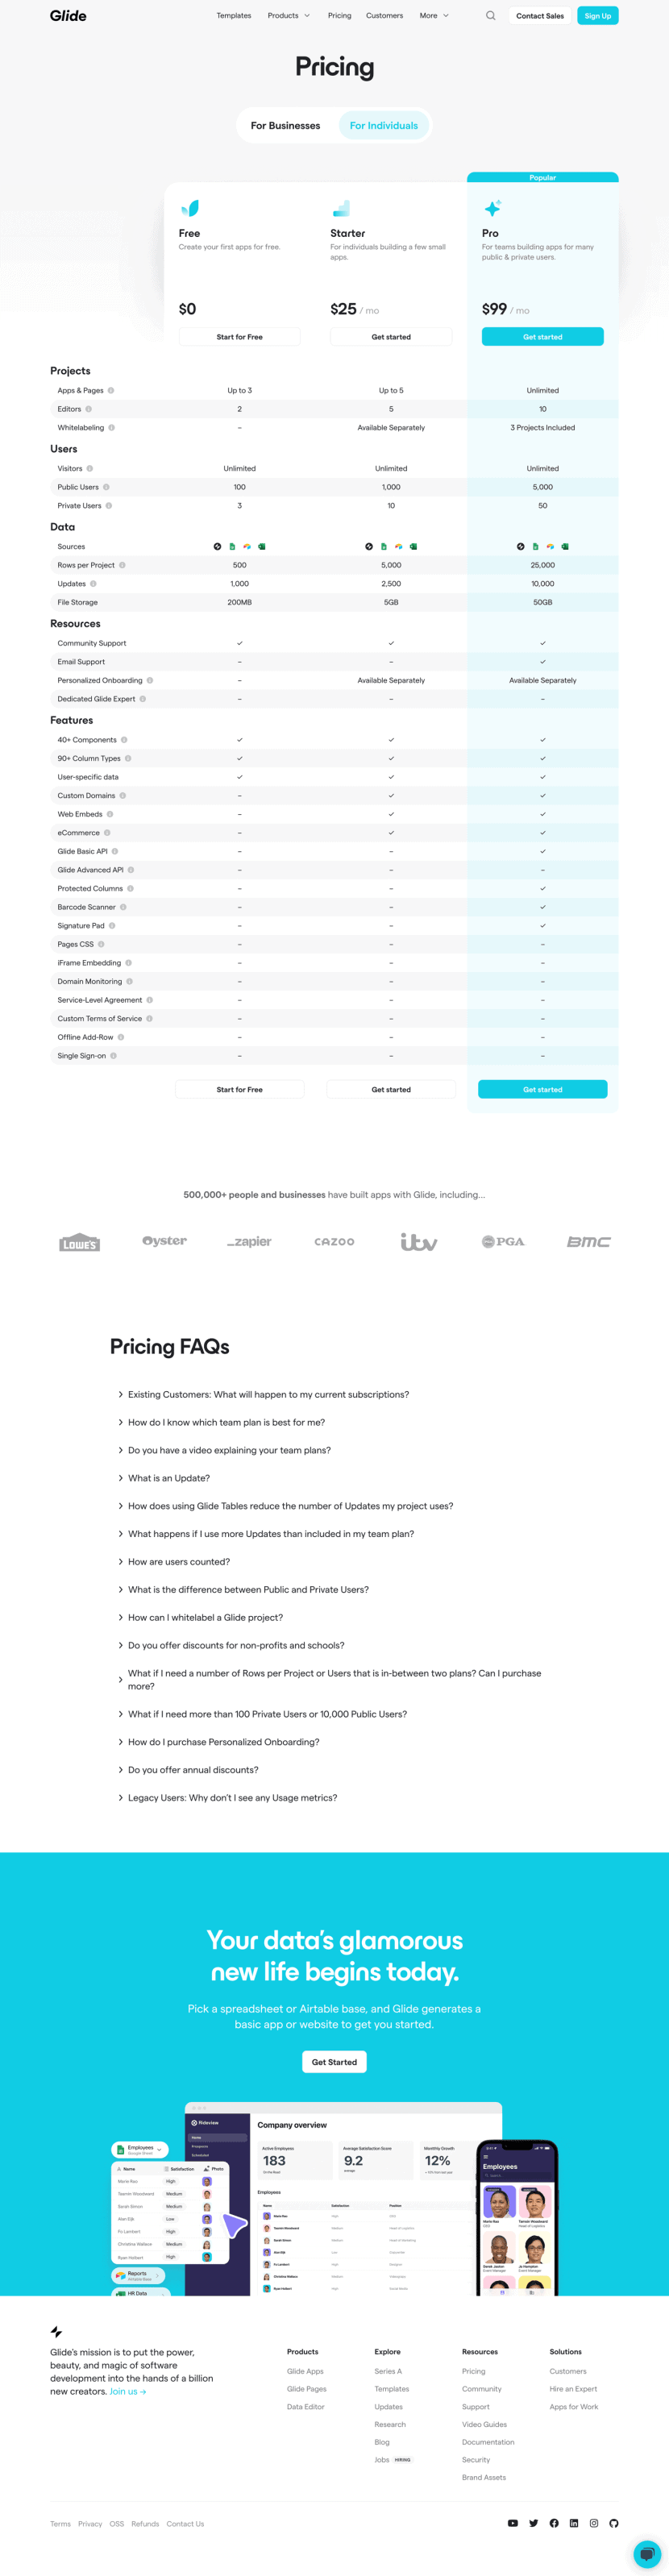 glide-pricing-page